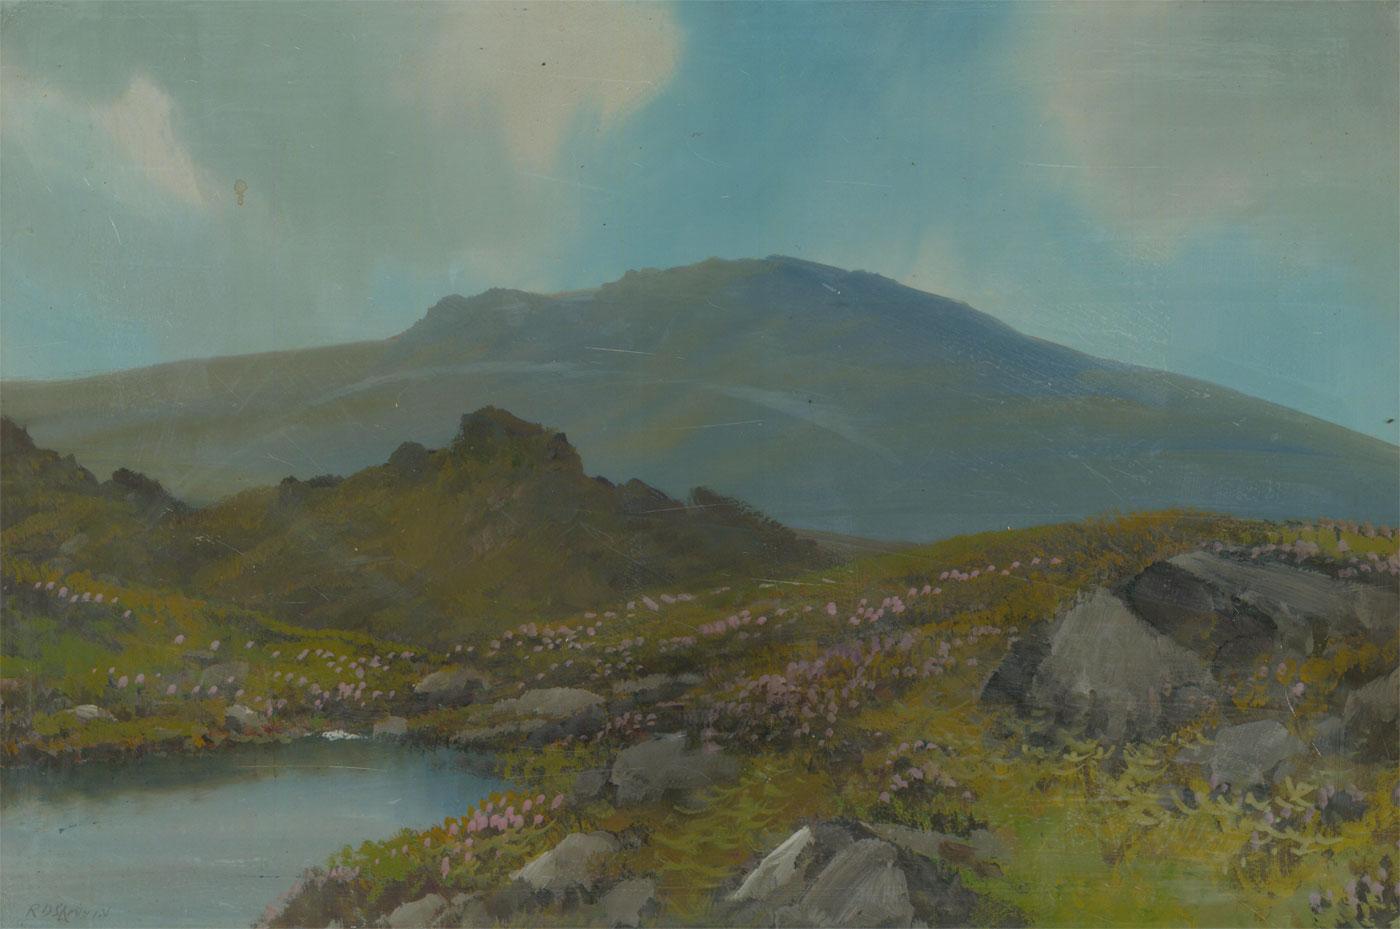 A delightful gouache landscape by listed artist Reginald Daniel Sherrin. The artwork has been signed to the lower left corner possibly by another hand. However the painting itself matches the style and compositional qualities of other works by